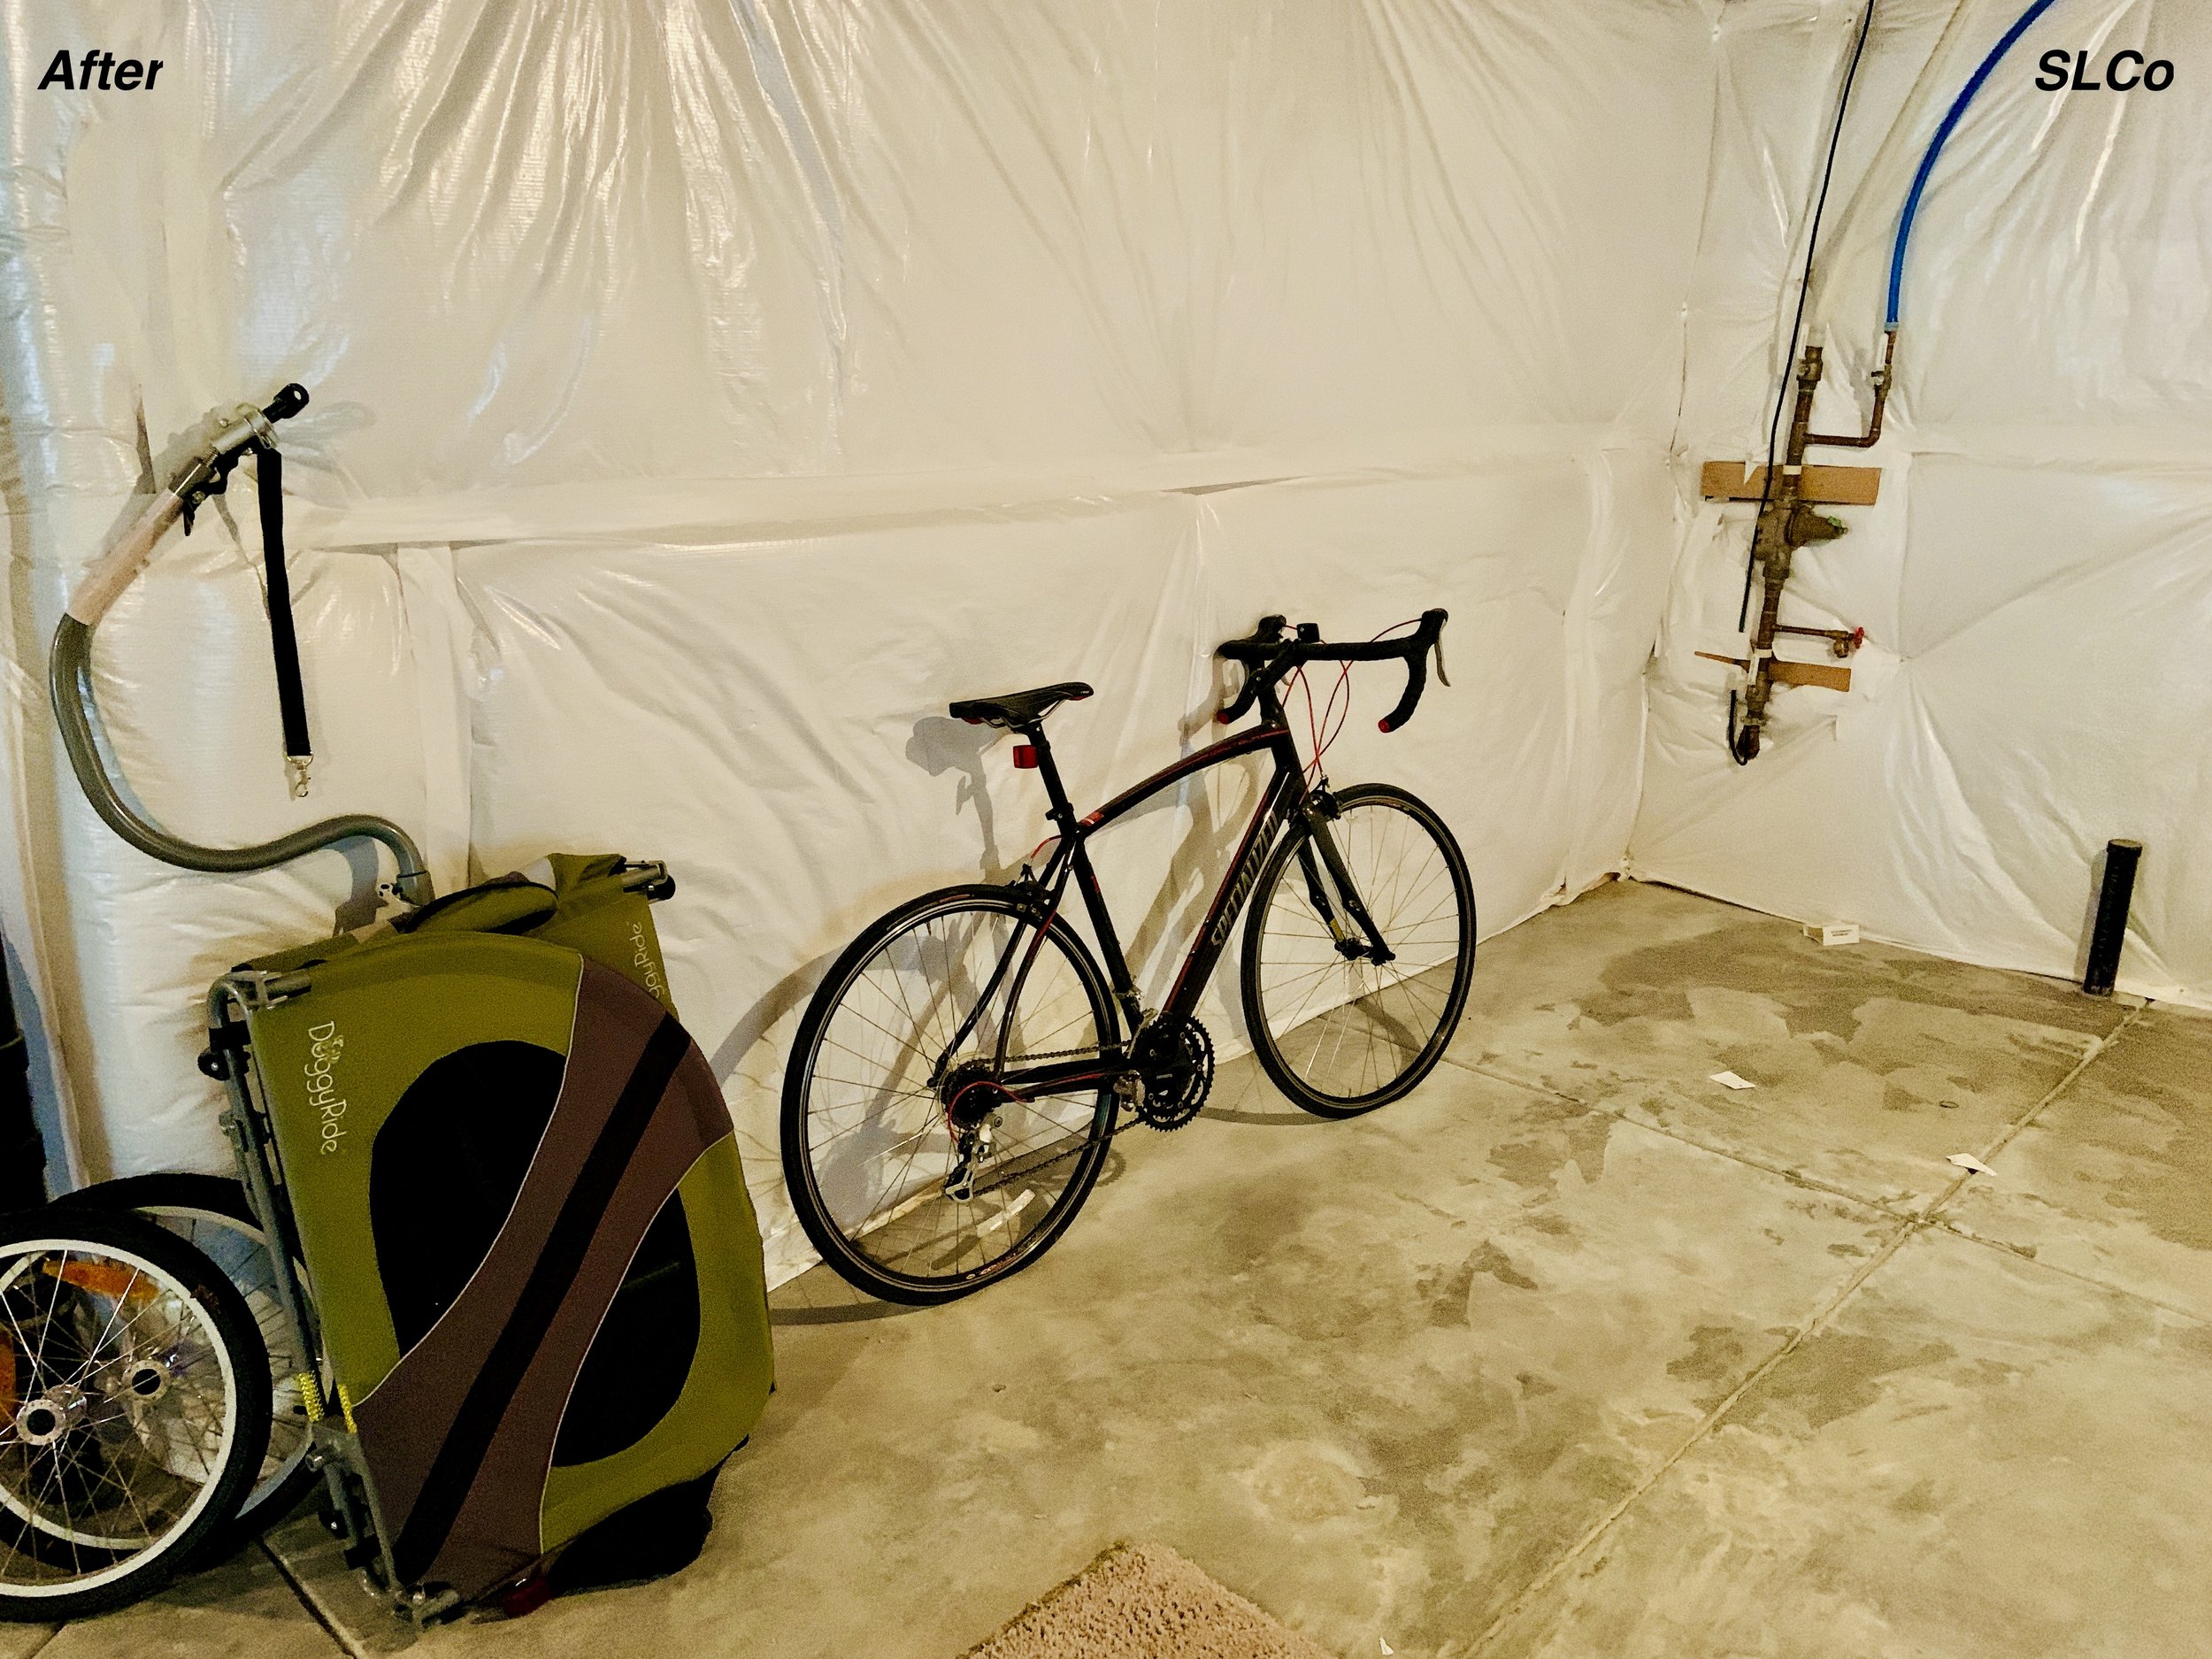 After photo of unfinished basement with bike against wall and floor clear